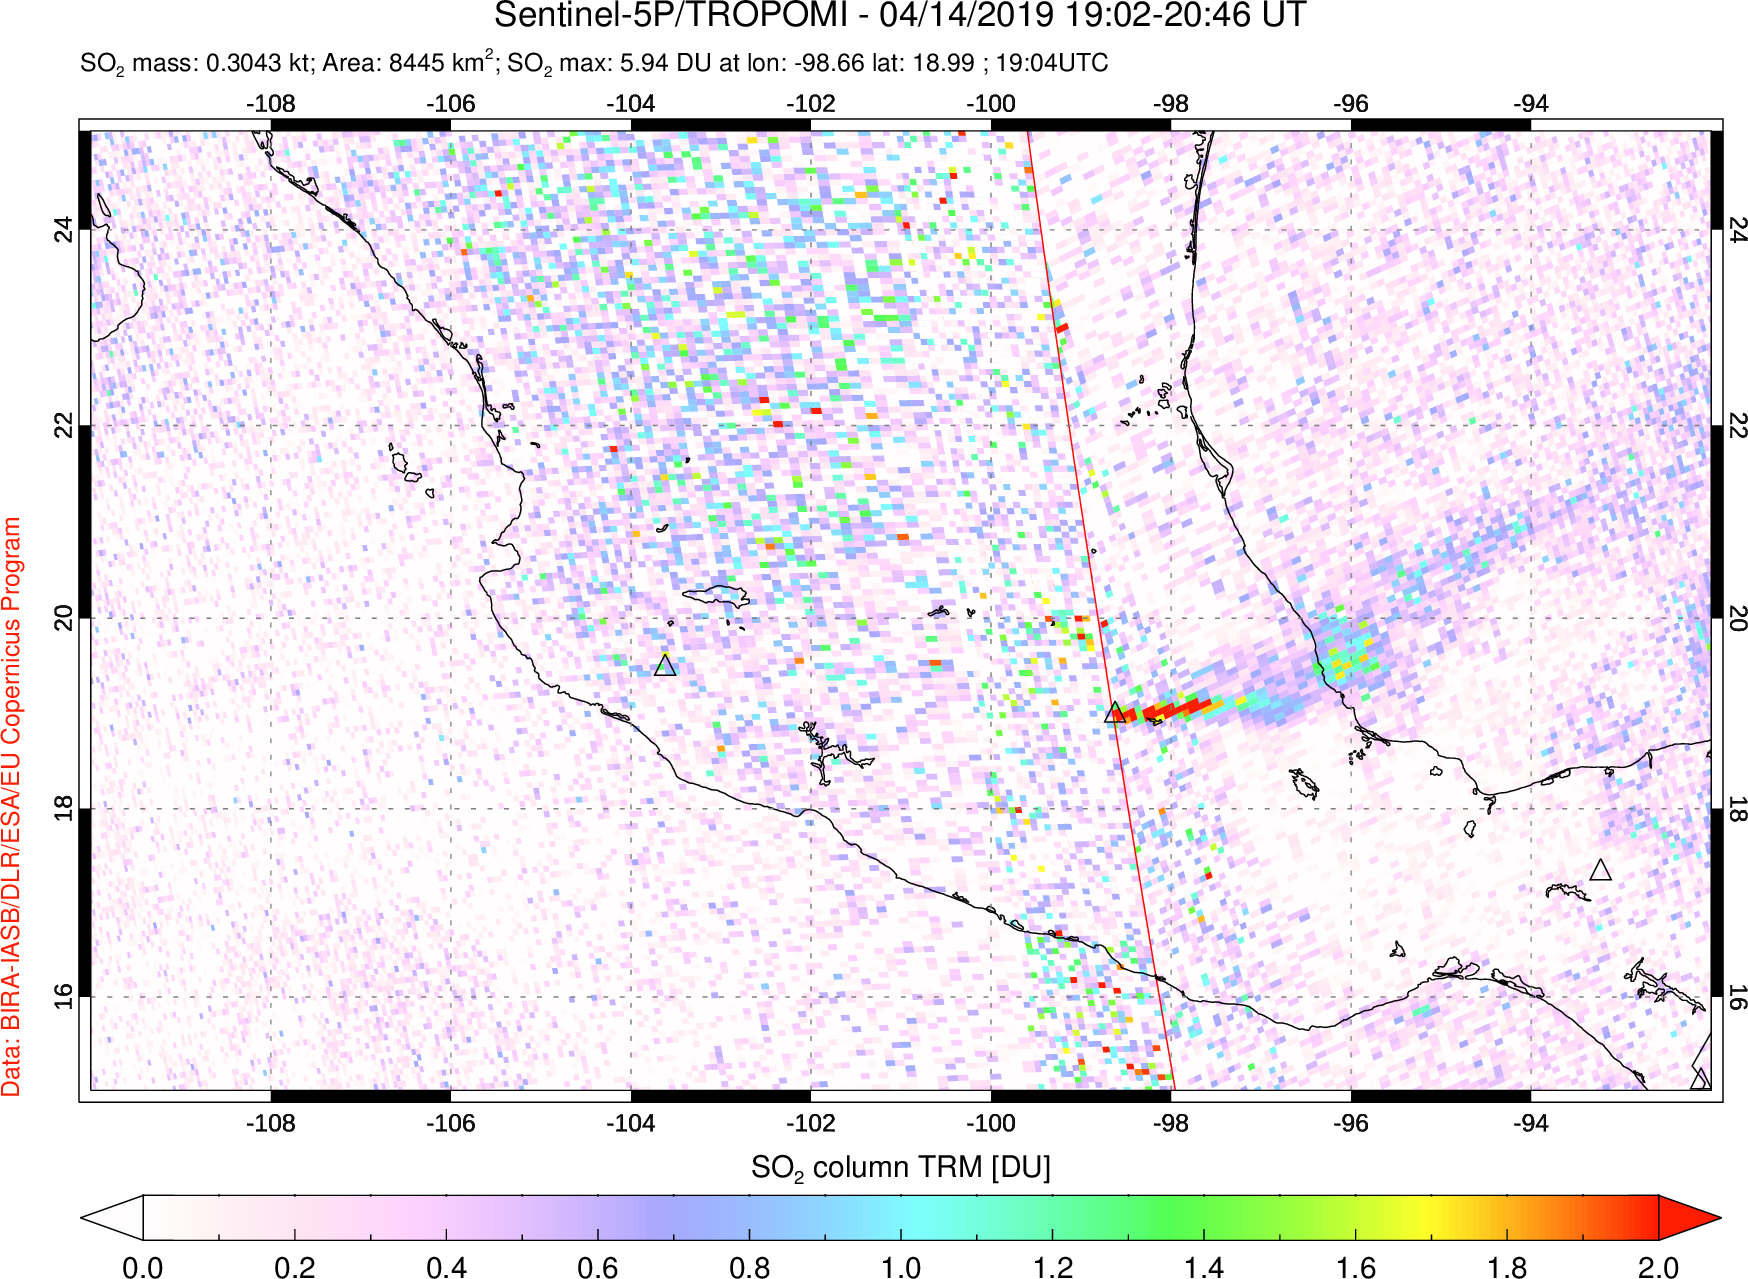 A sulfur dioxide image over Mexico on Apr 14, 2019.